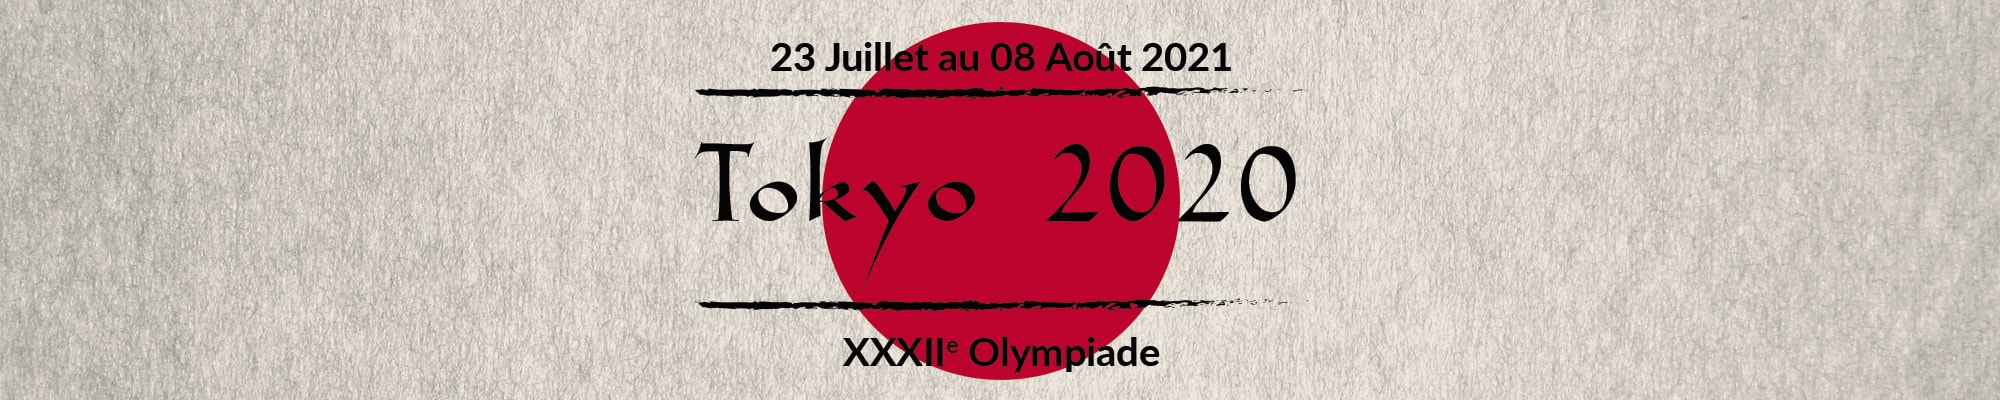 Header Jeux Olympiques